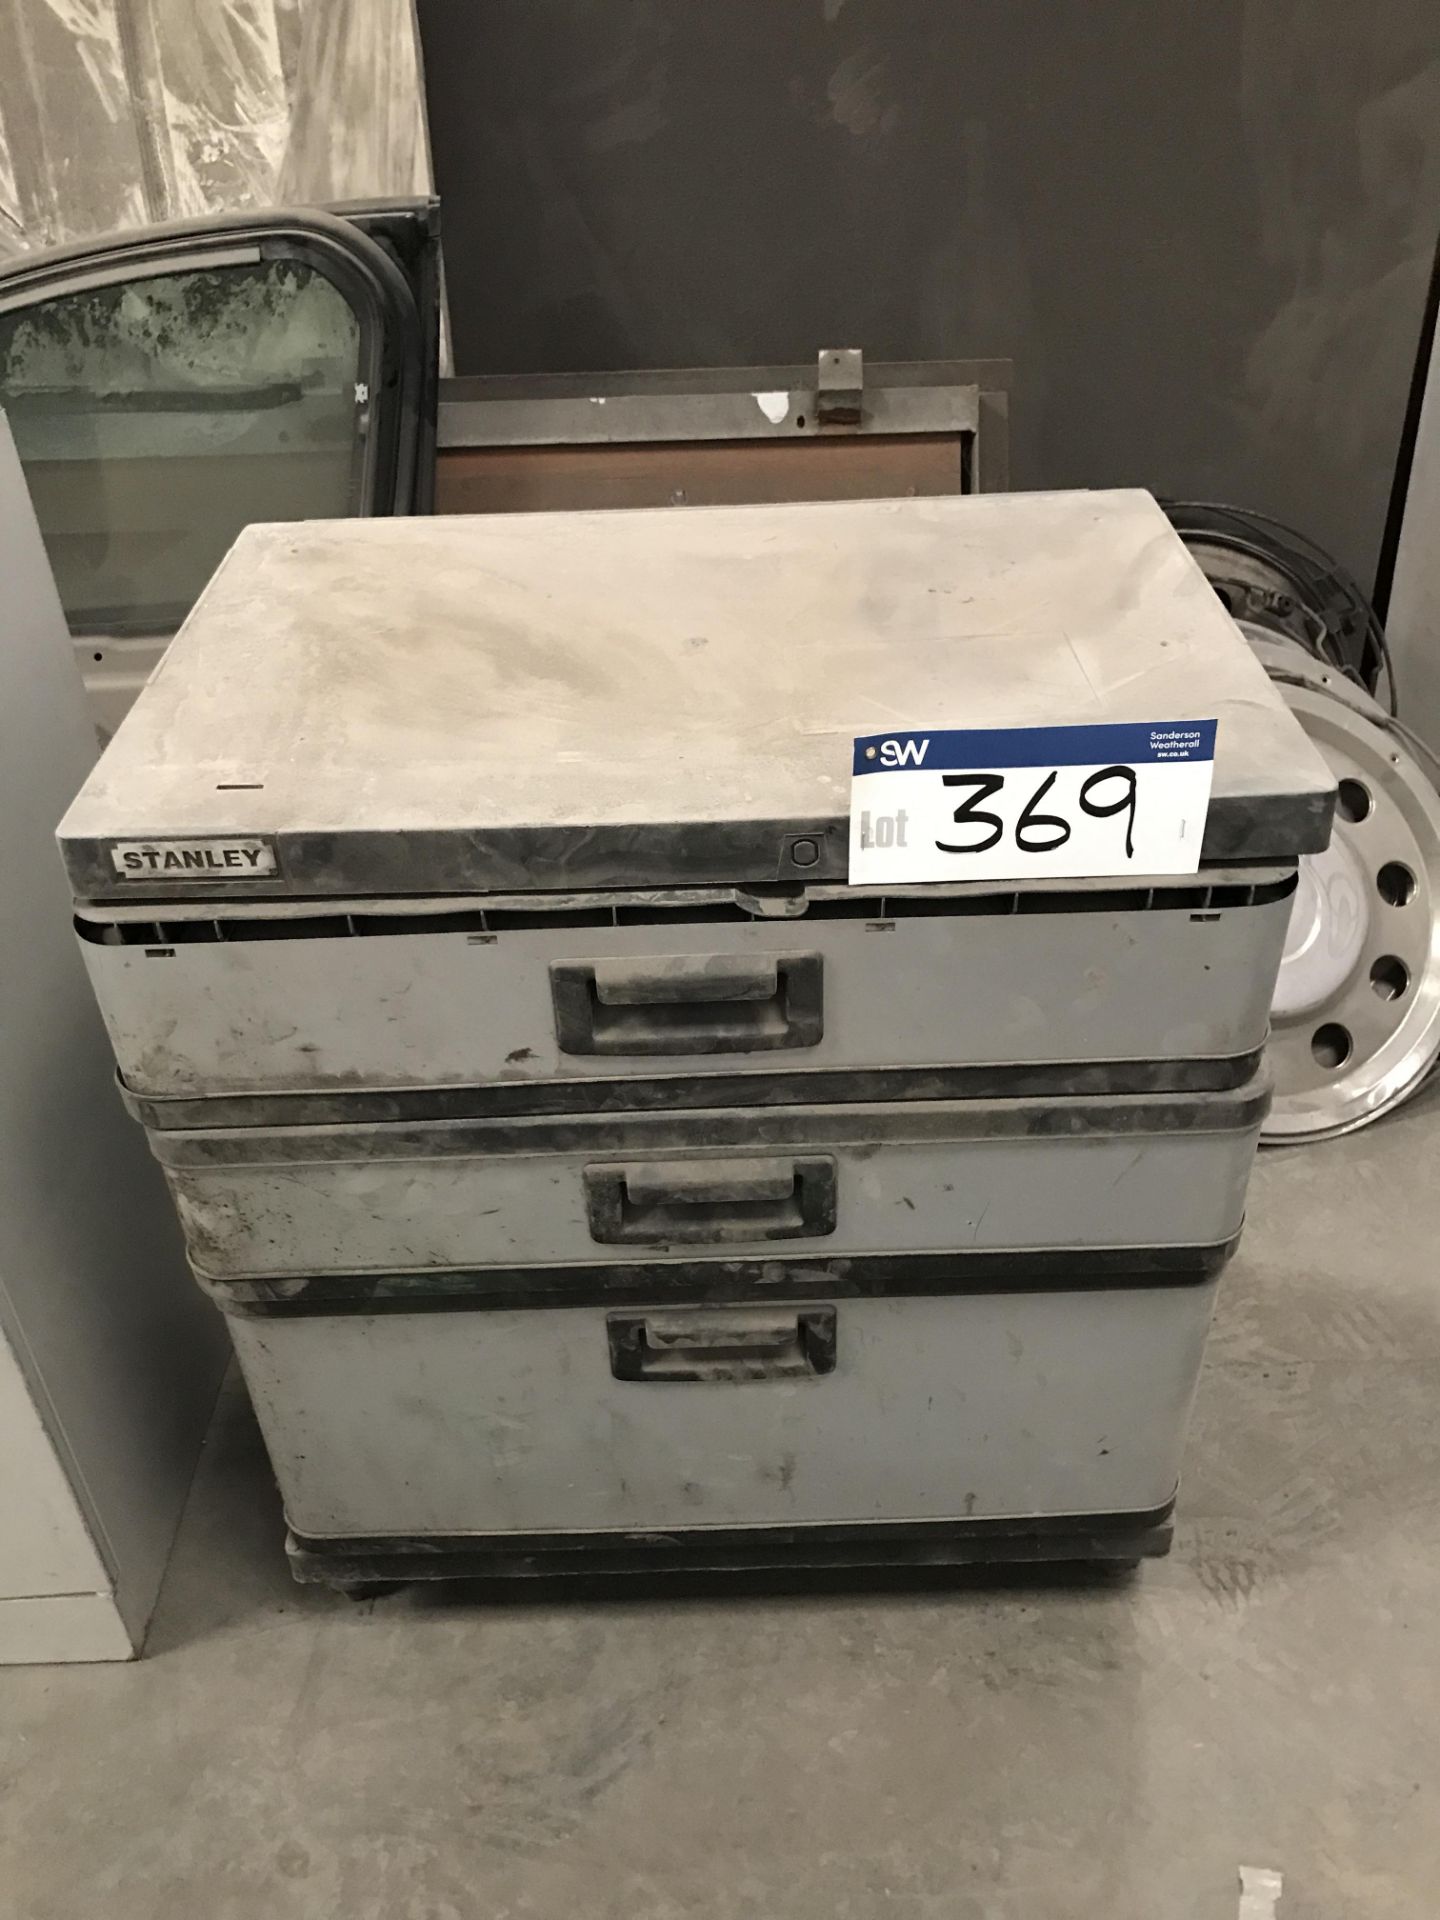 Stanley Three Section Toolbox (lot located at Bedfords Limited (In Administration), Pheasant